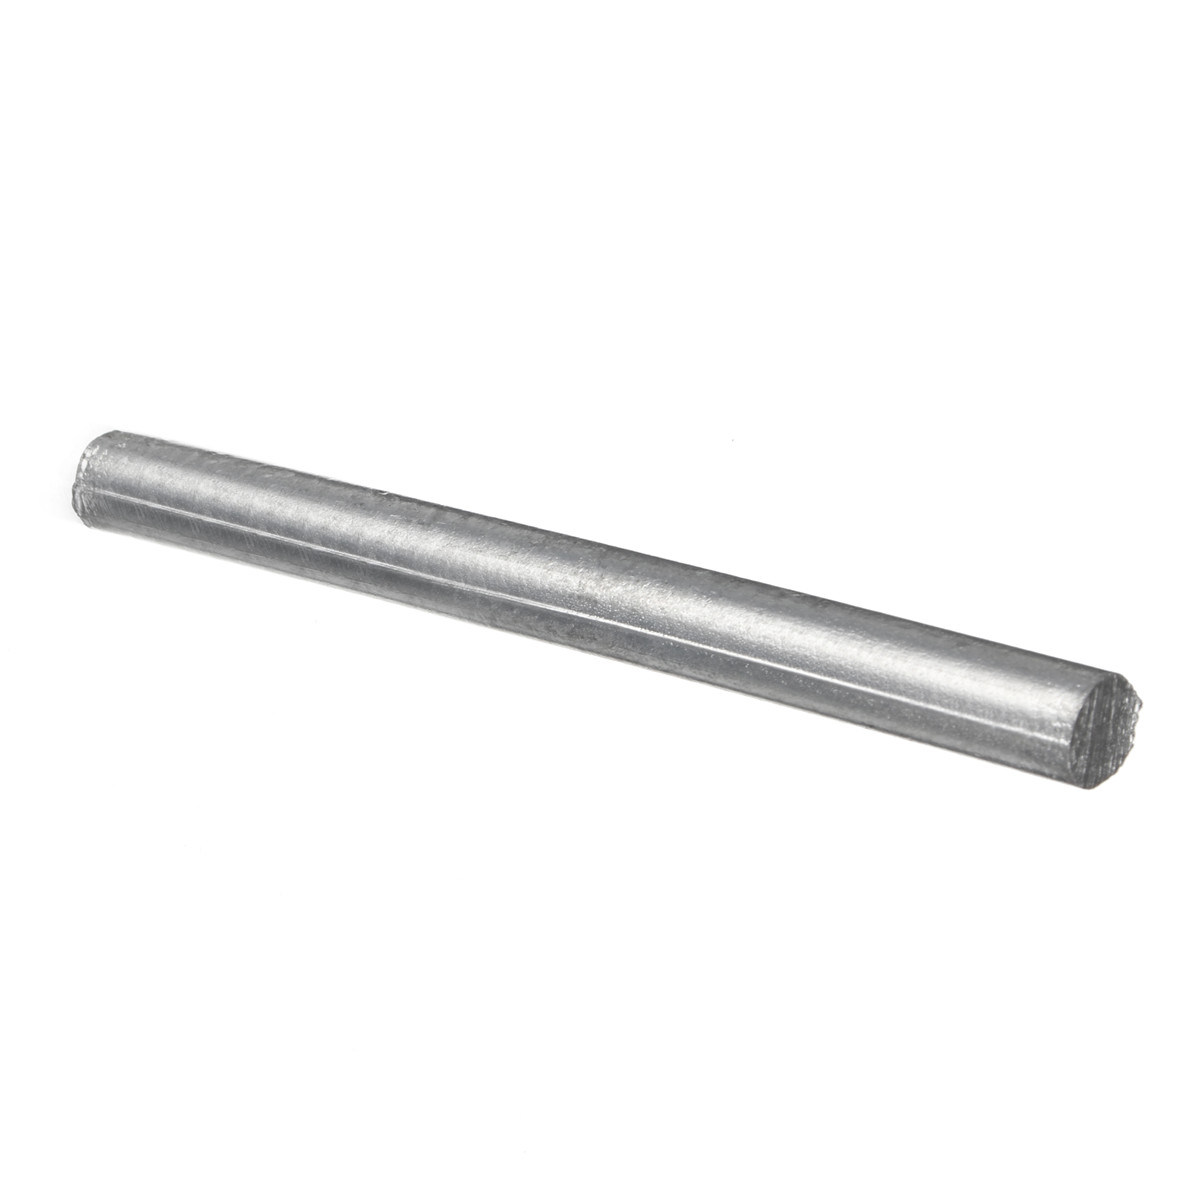 0.4"x 4" Purity Zn 99.95% Zinc Rods Anode Electroplating Solid Round Bar Durable Universal for Anode Electroplating Zinc Plating